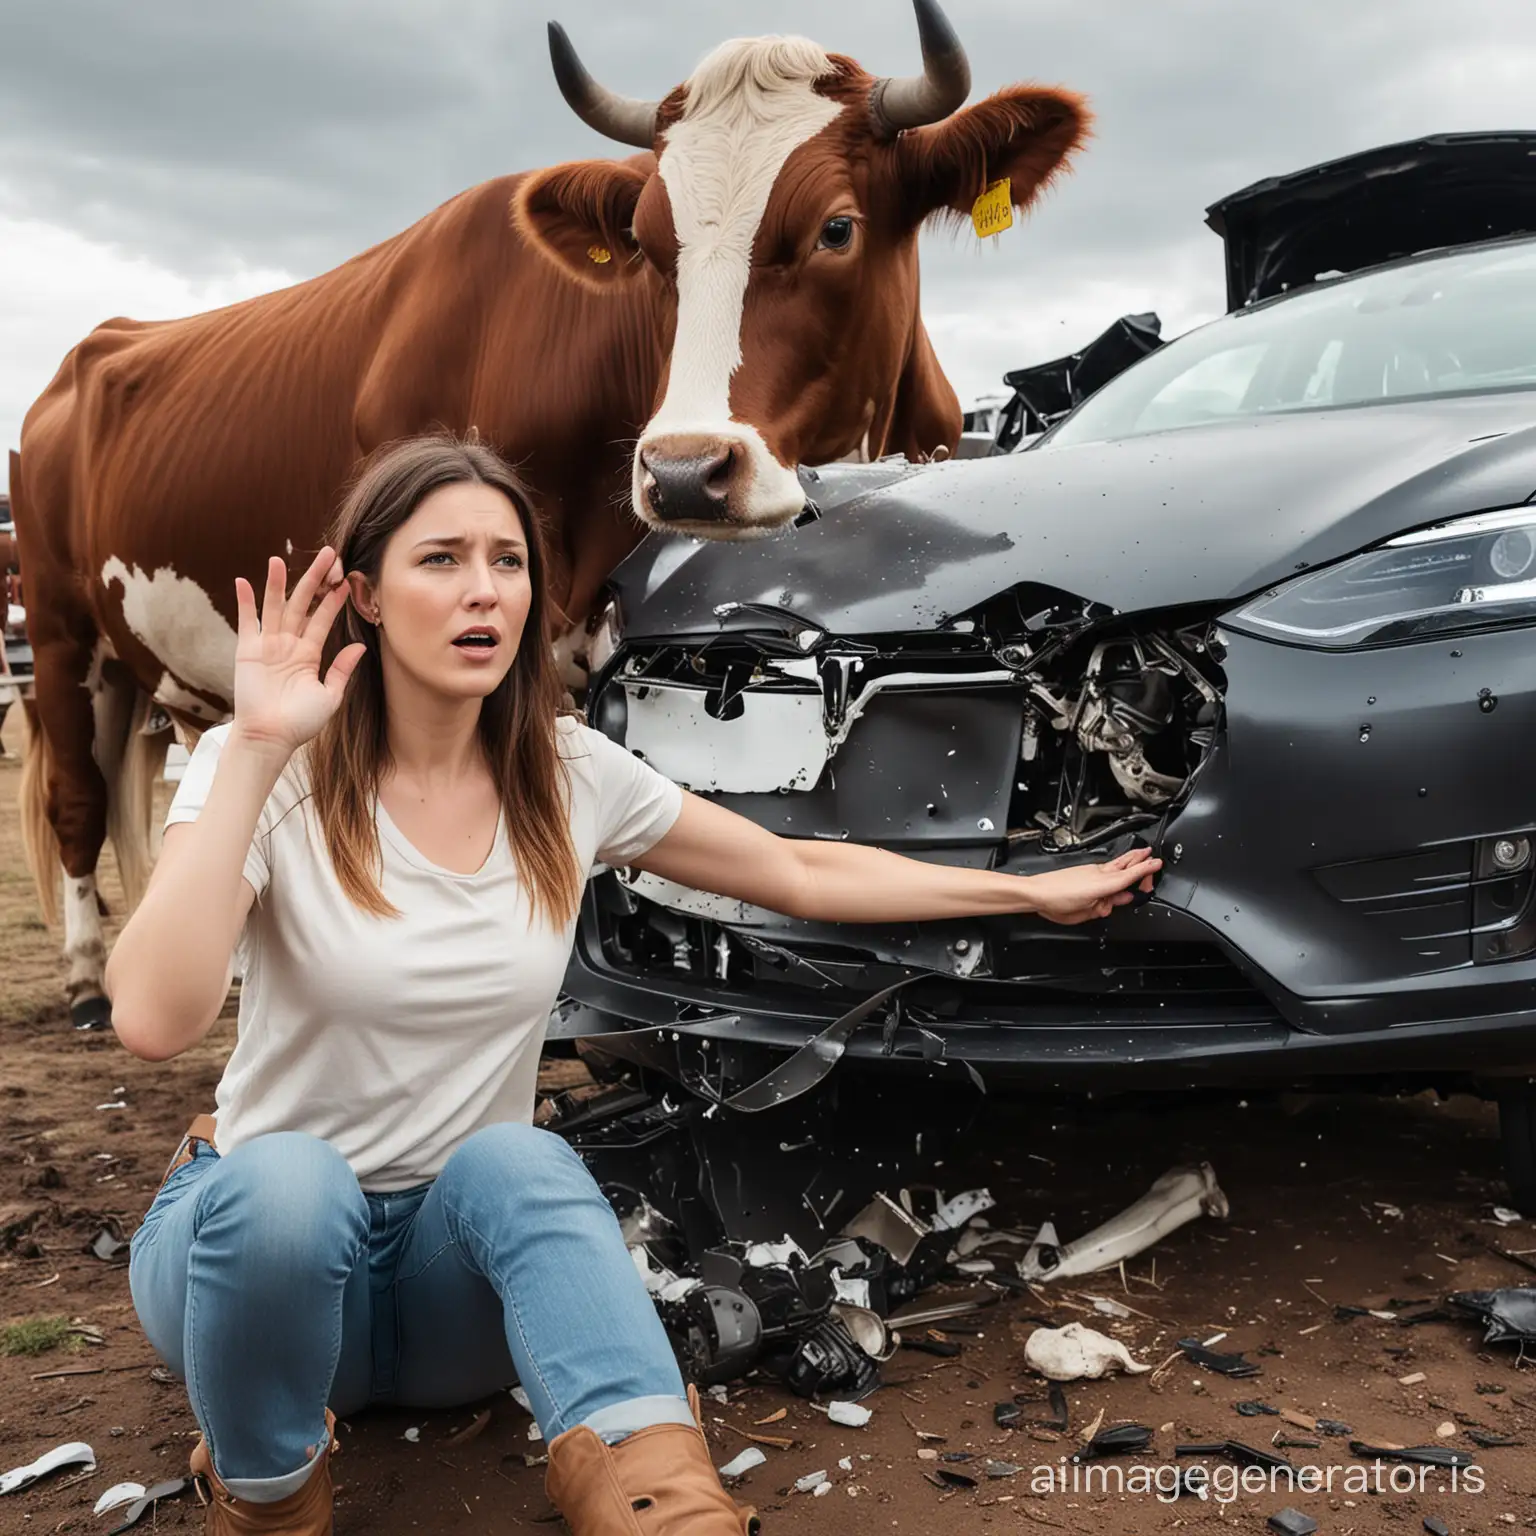 A big car crash with a Tesla crashing into a cow with the cow flying and car parts going everywhere. Show an attractive woman sitting in the drivers seat of the car while putting her head into her hands shaking her head in embarassment